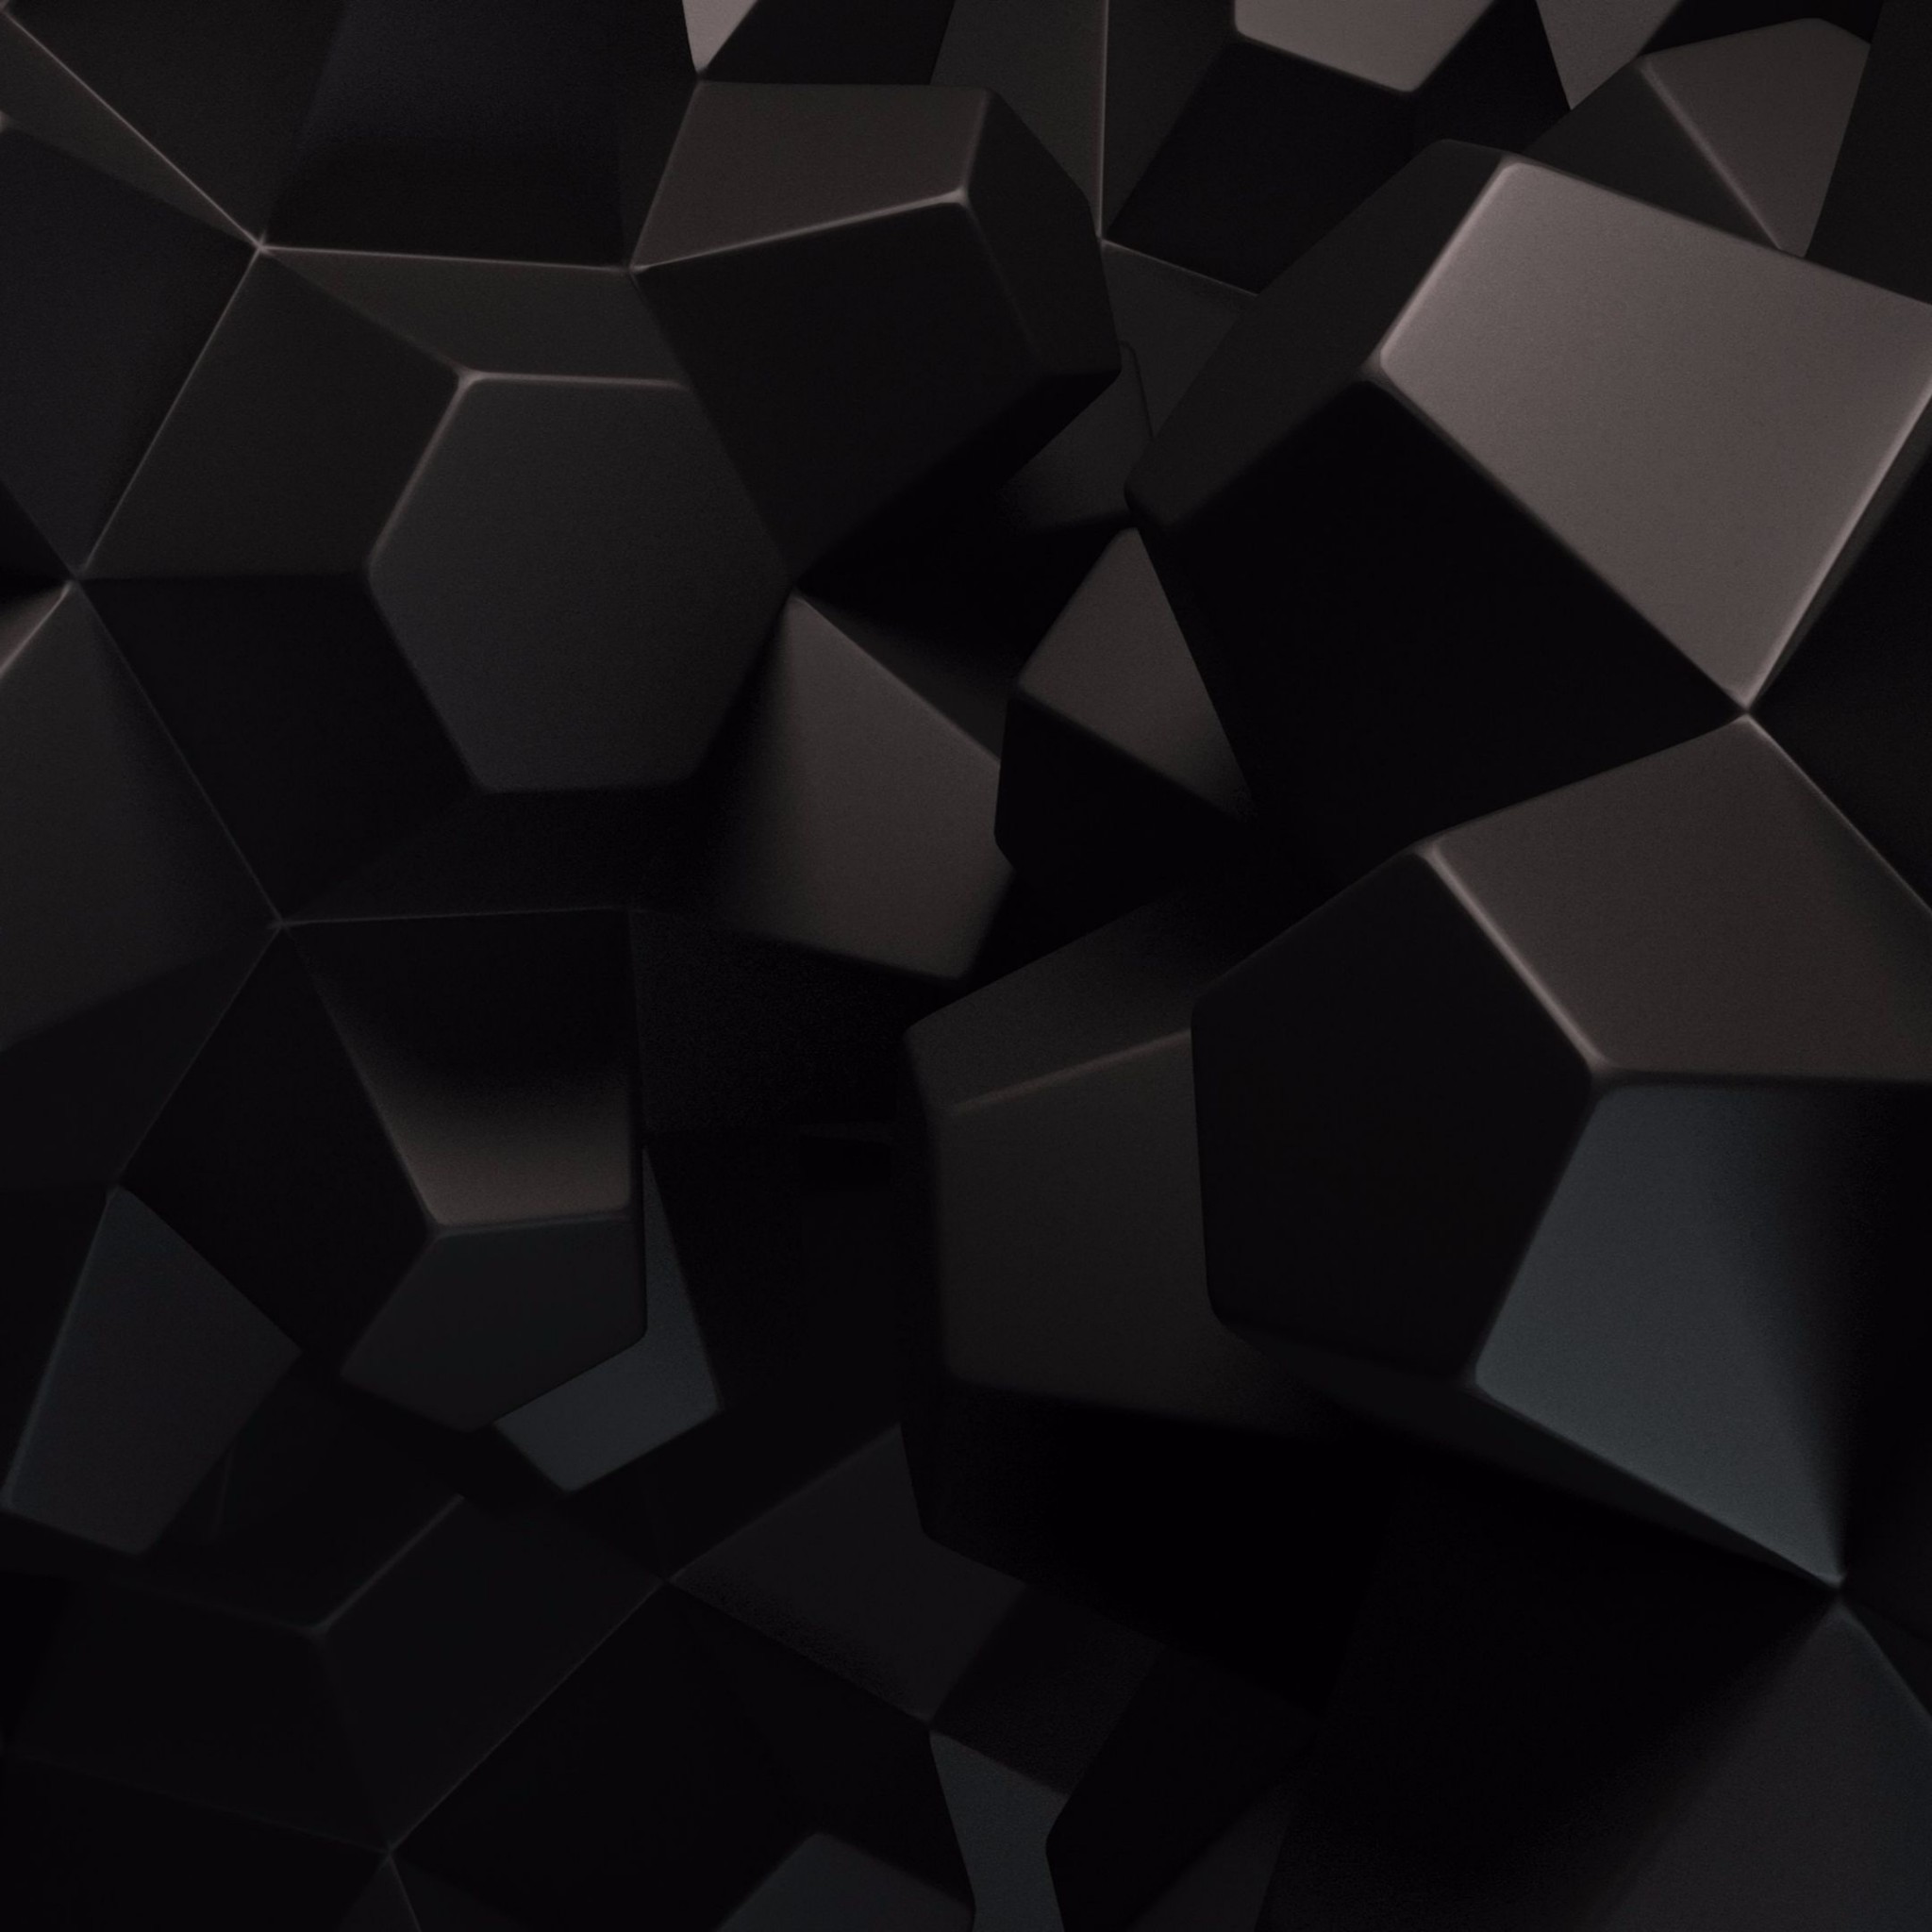 2048x2048 Related to Black Cubes 4K Abstract Wallpapers